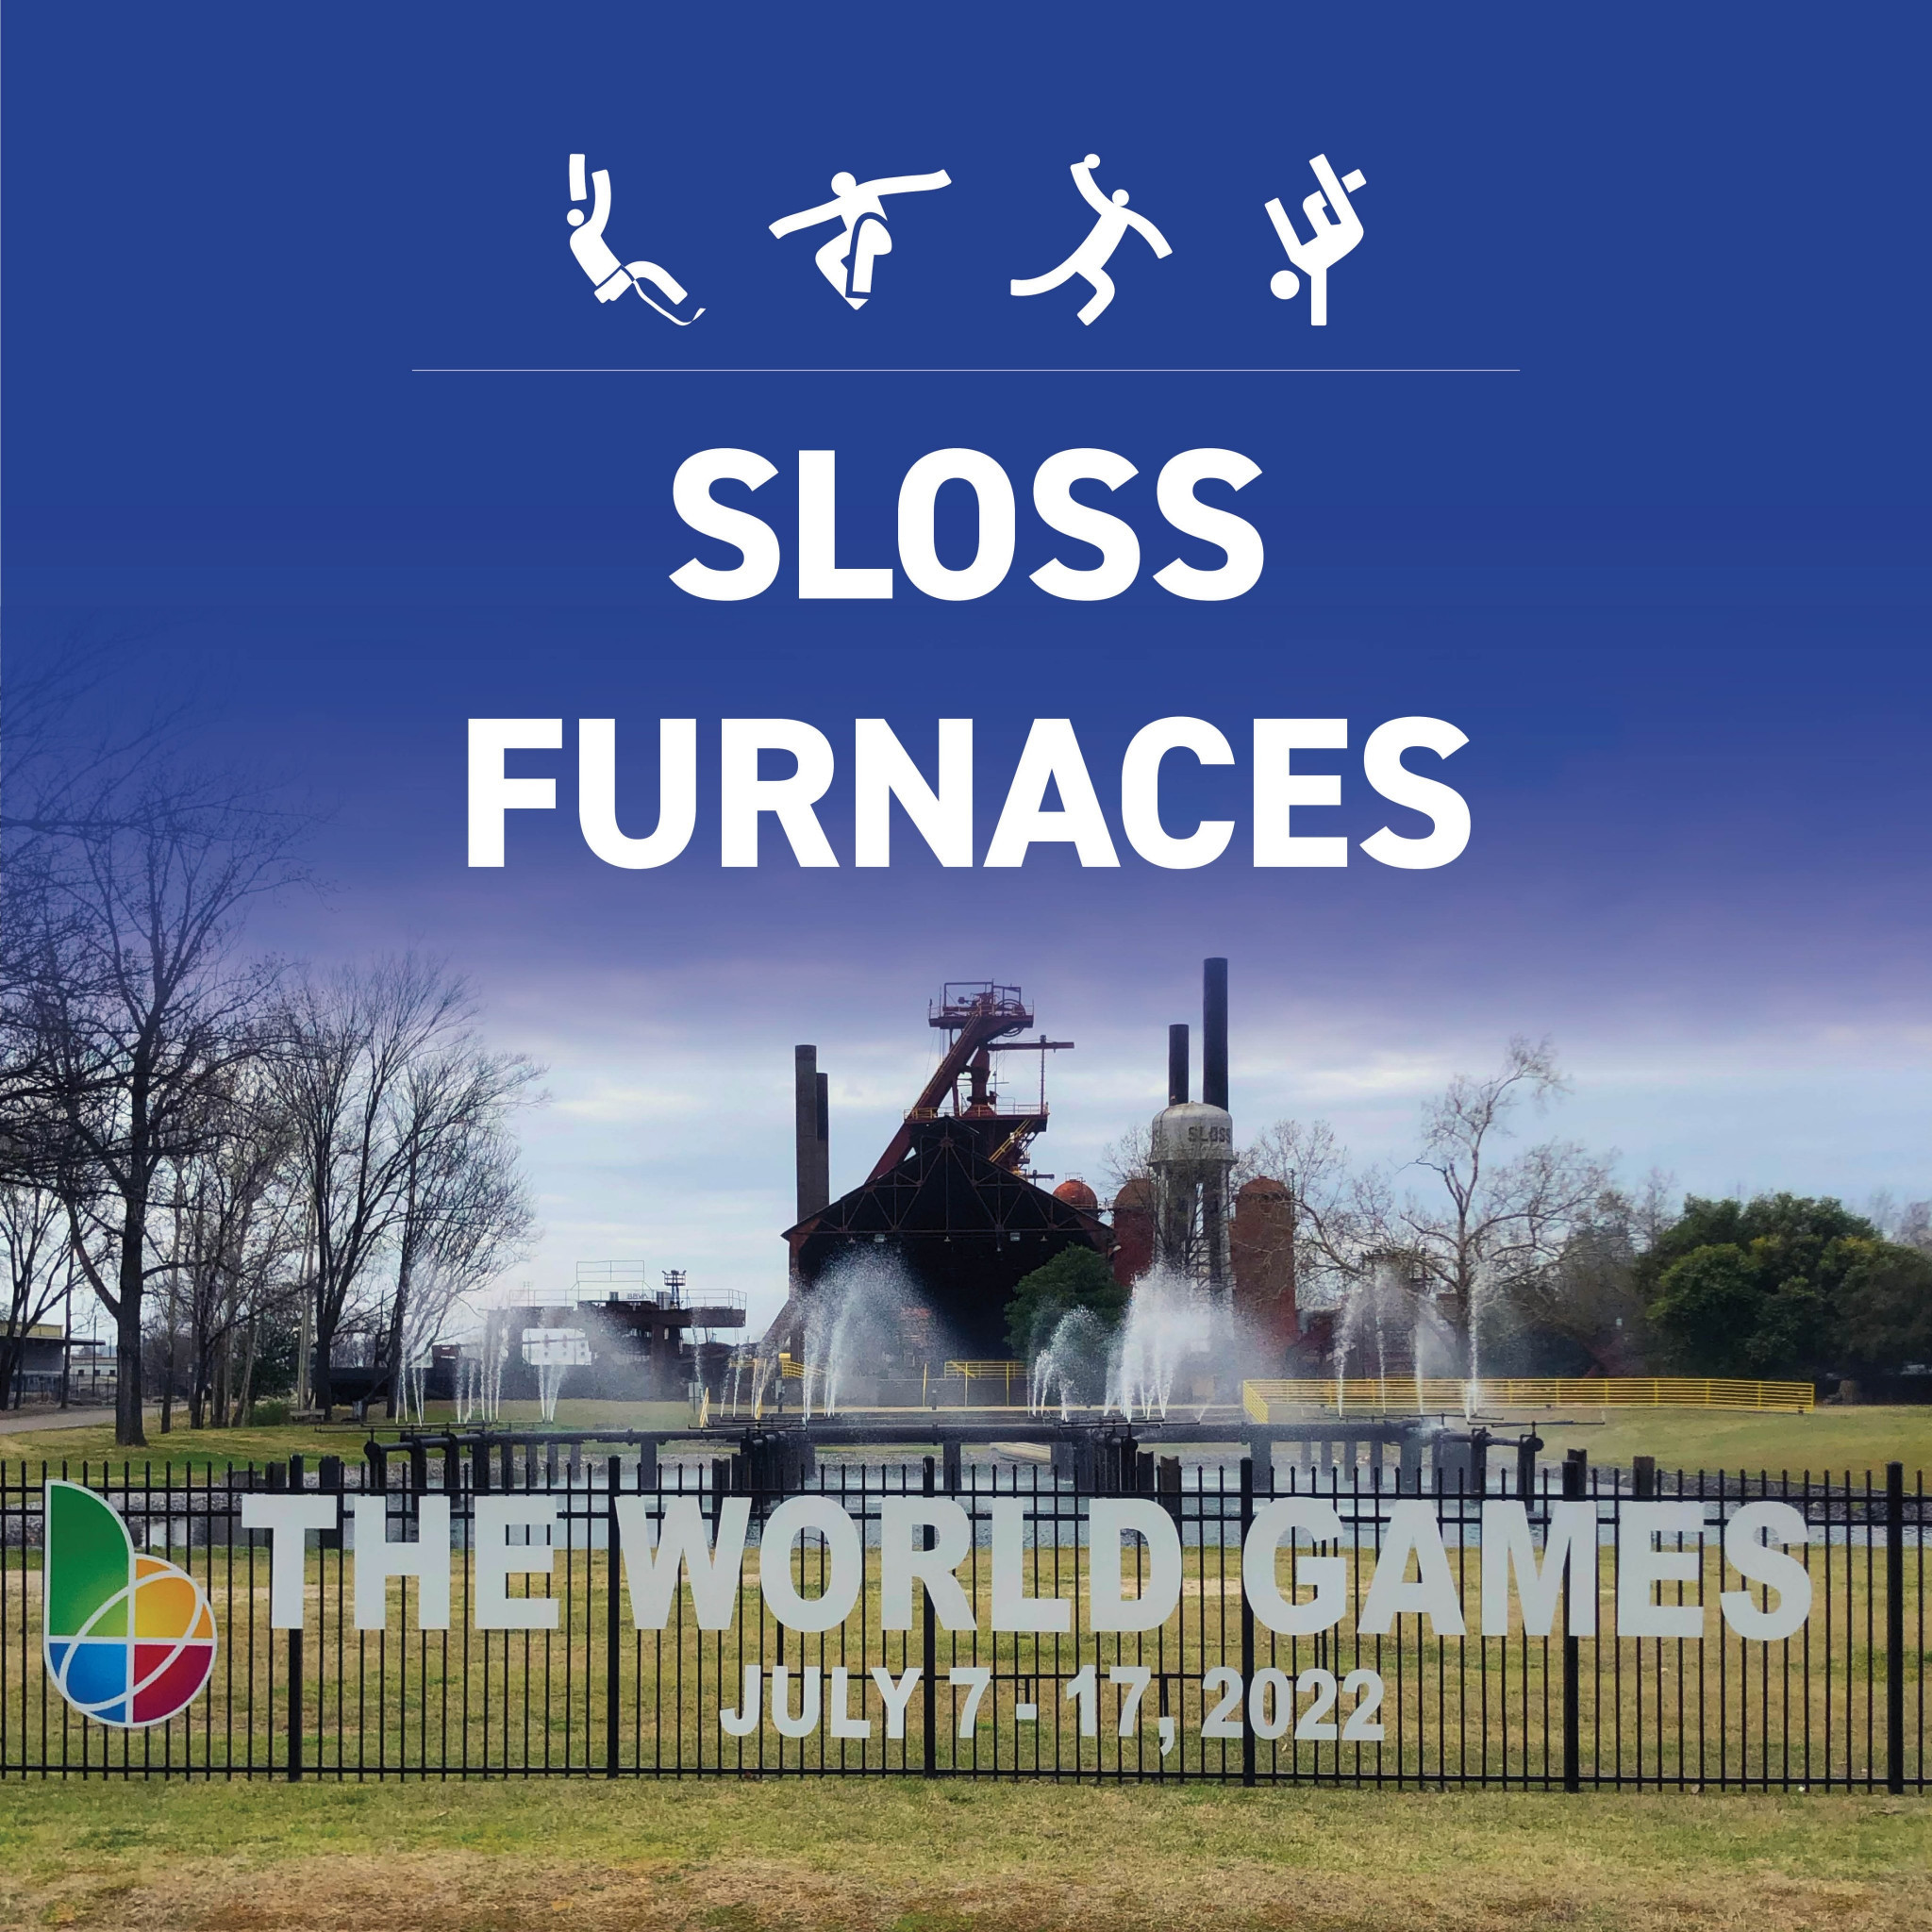 Sloss Furnaces has been confirmed as the venue for sport climbing, breaking, parkour and beach volleyball competitions ©Birmingham 2022